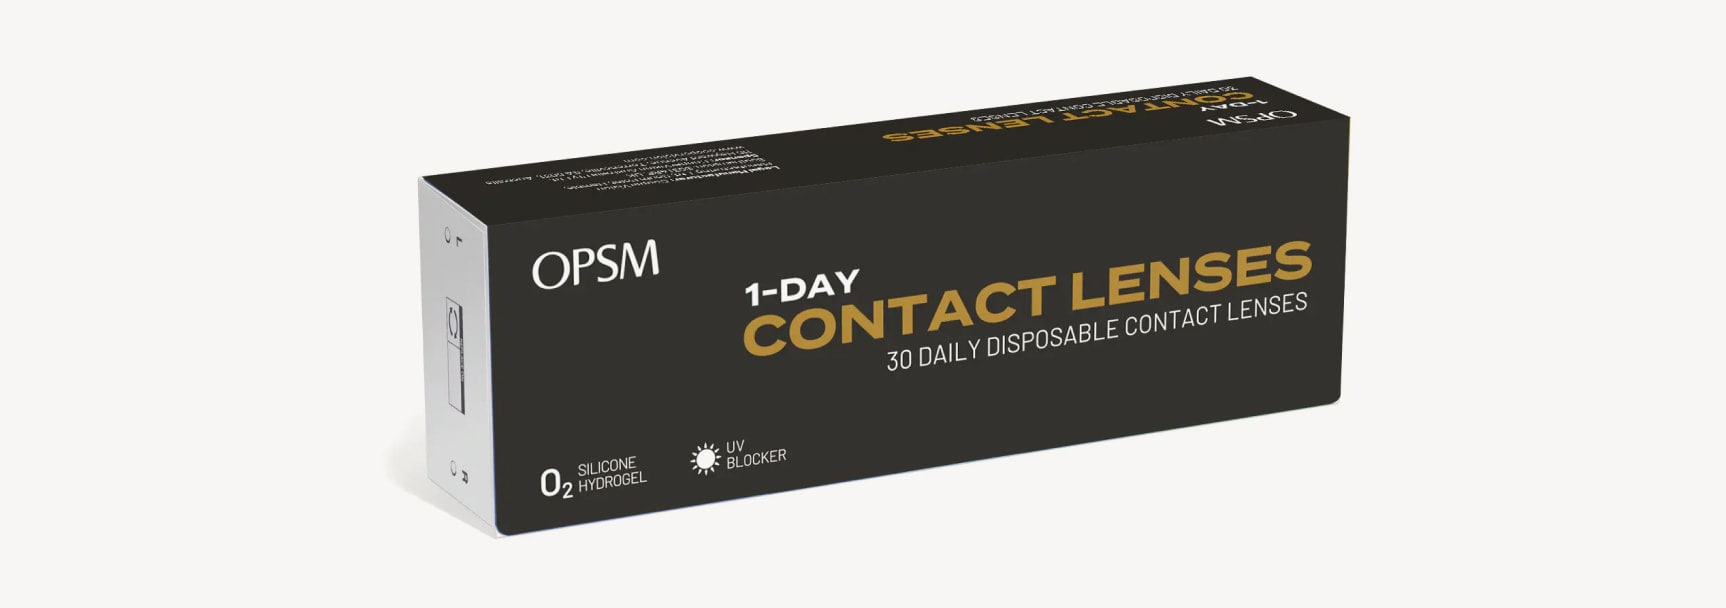 OPSM Loves Eyes Daily Disposable Contact Lenses